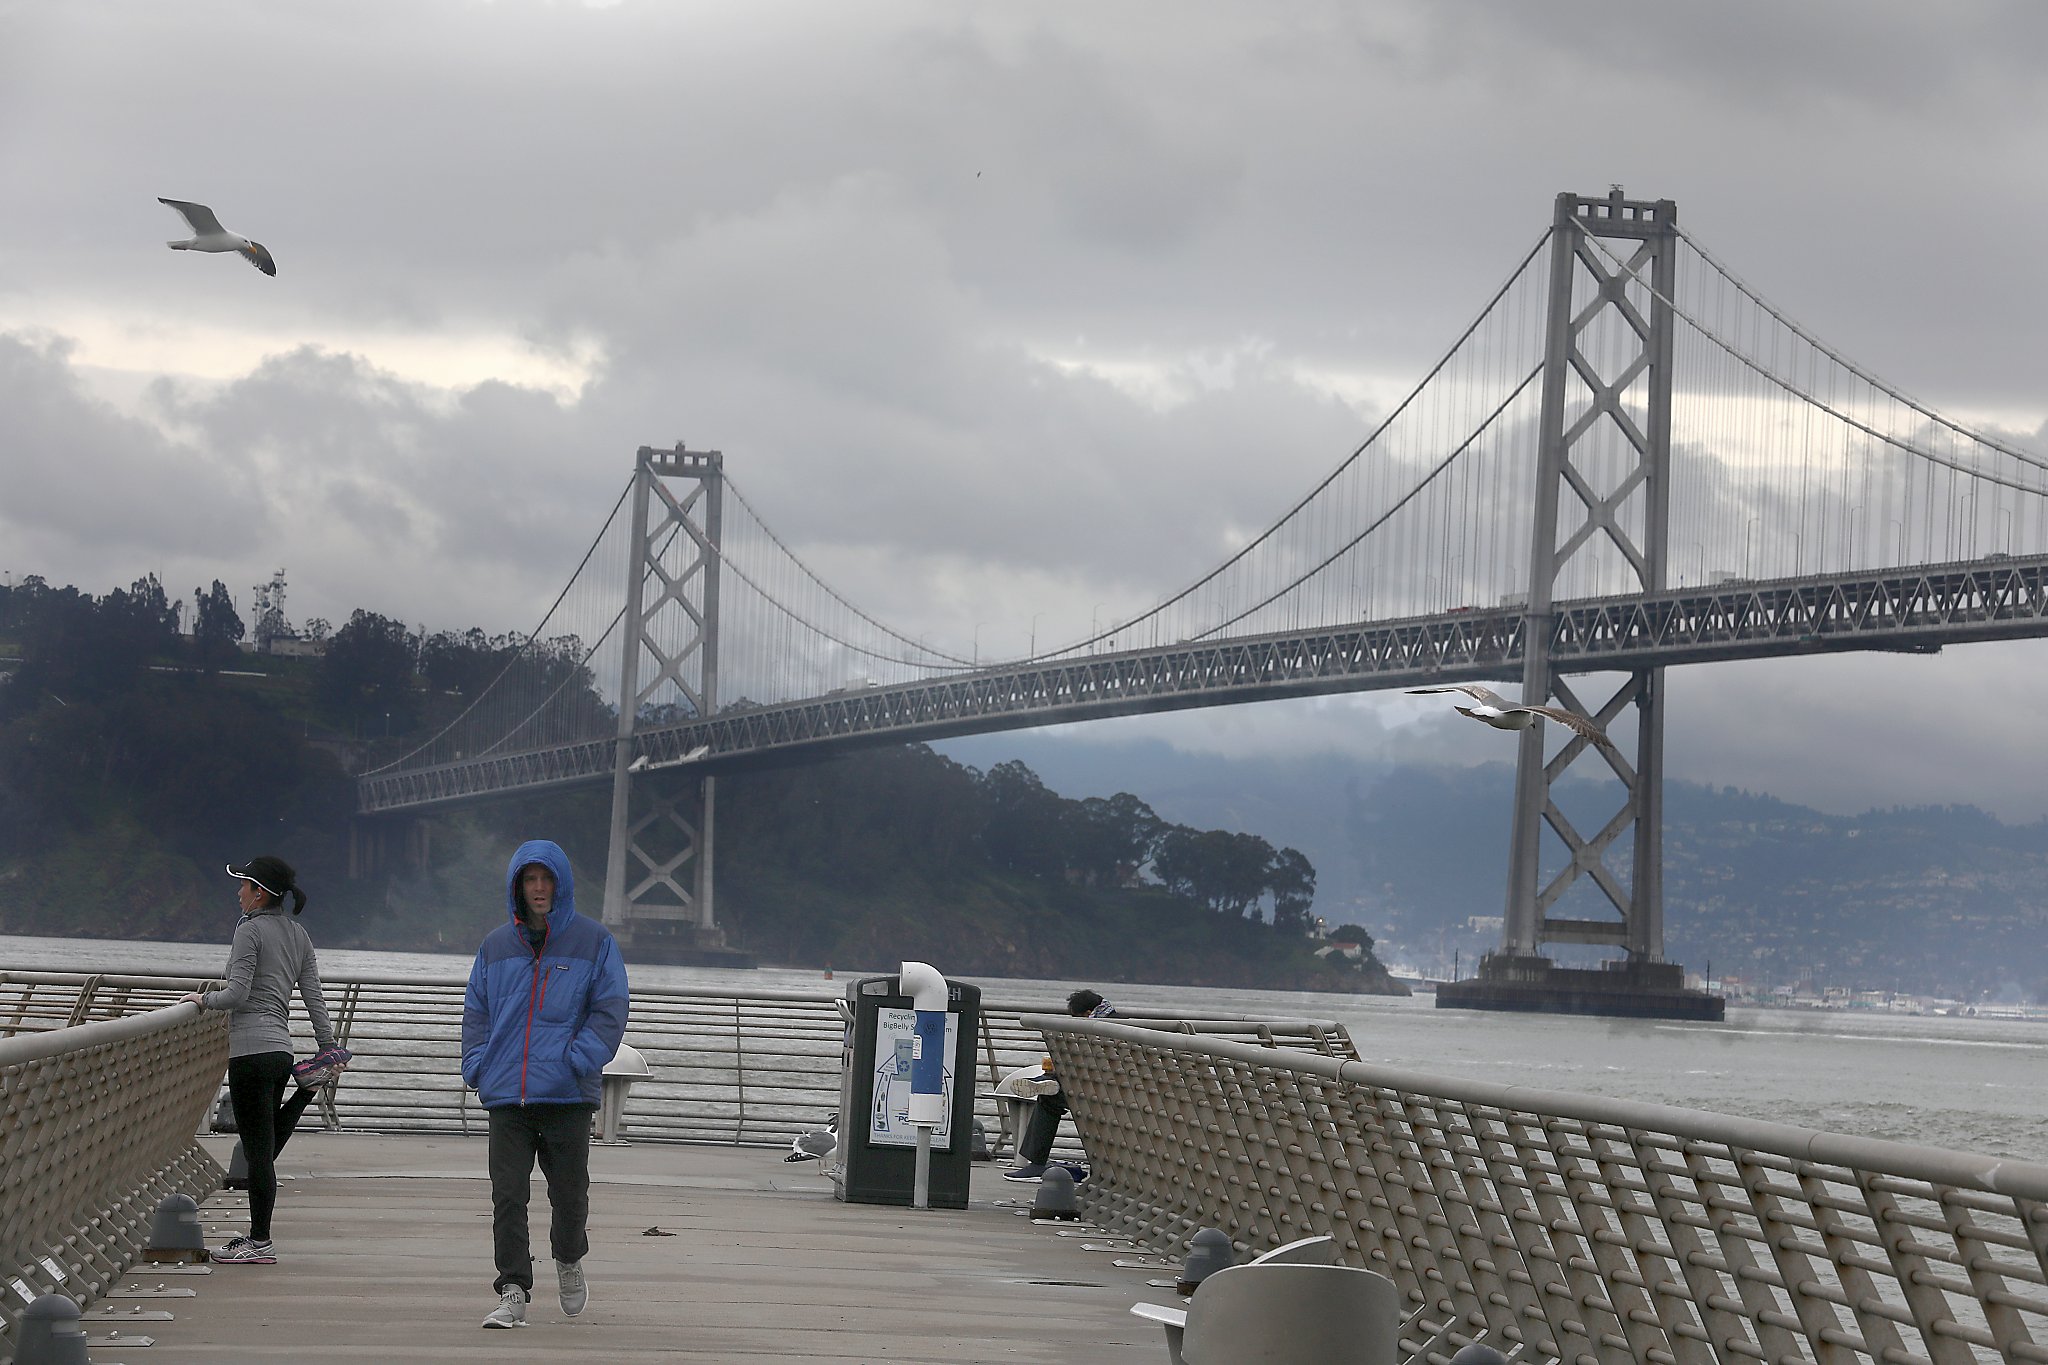 7-day San Francisco Bay Area weather forecast: 'Overall it looks like weather in san francisco in march